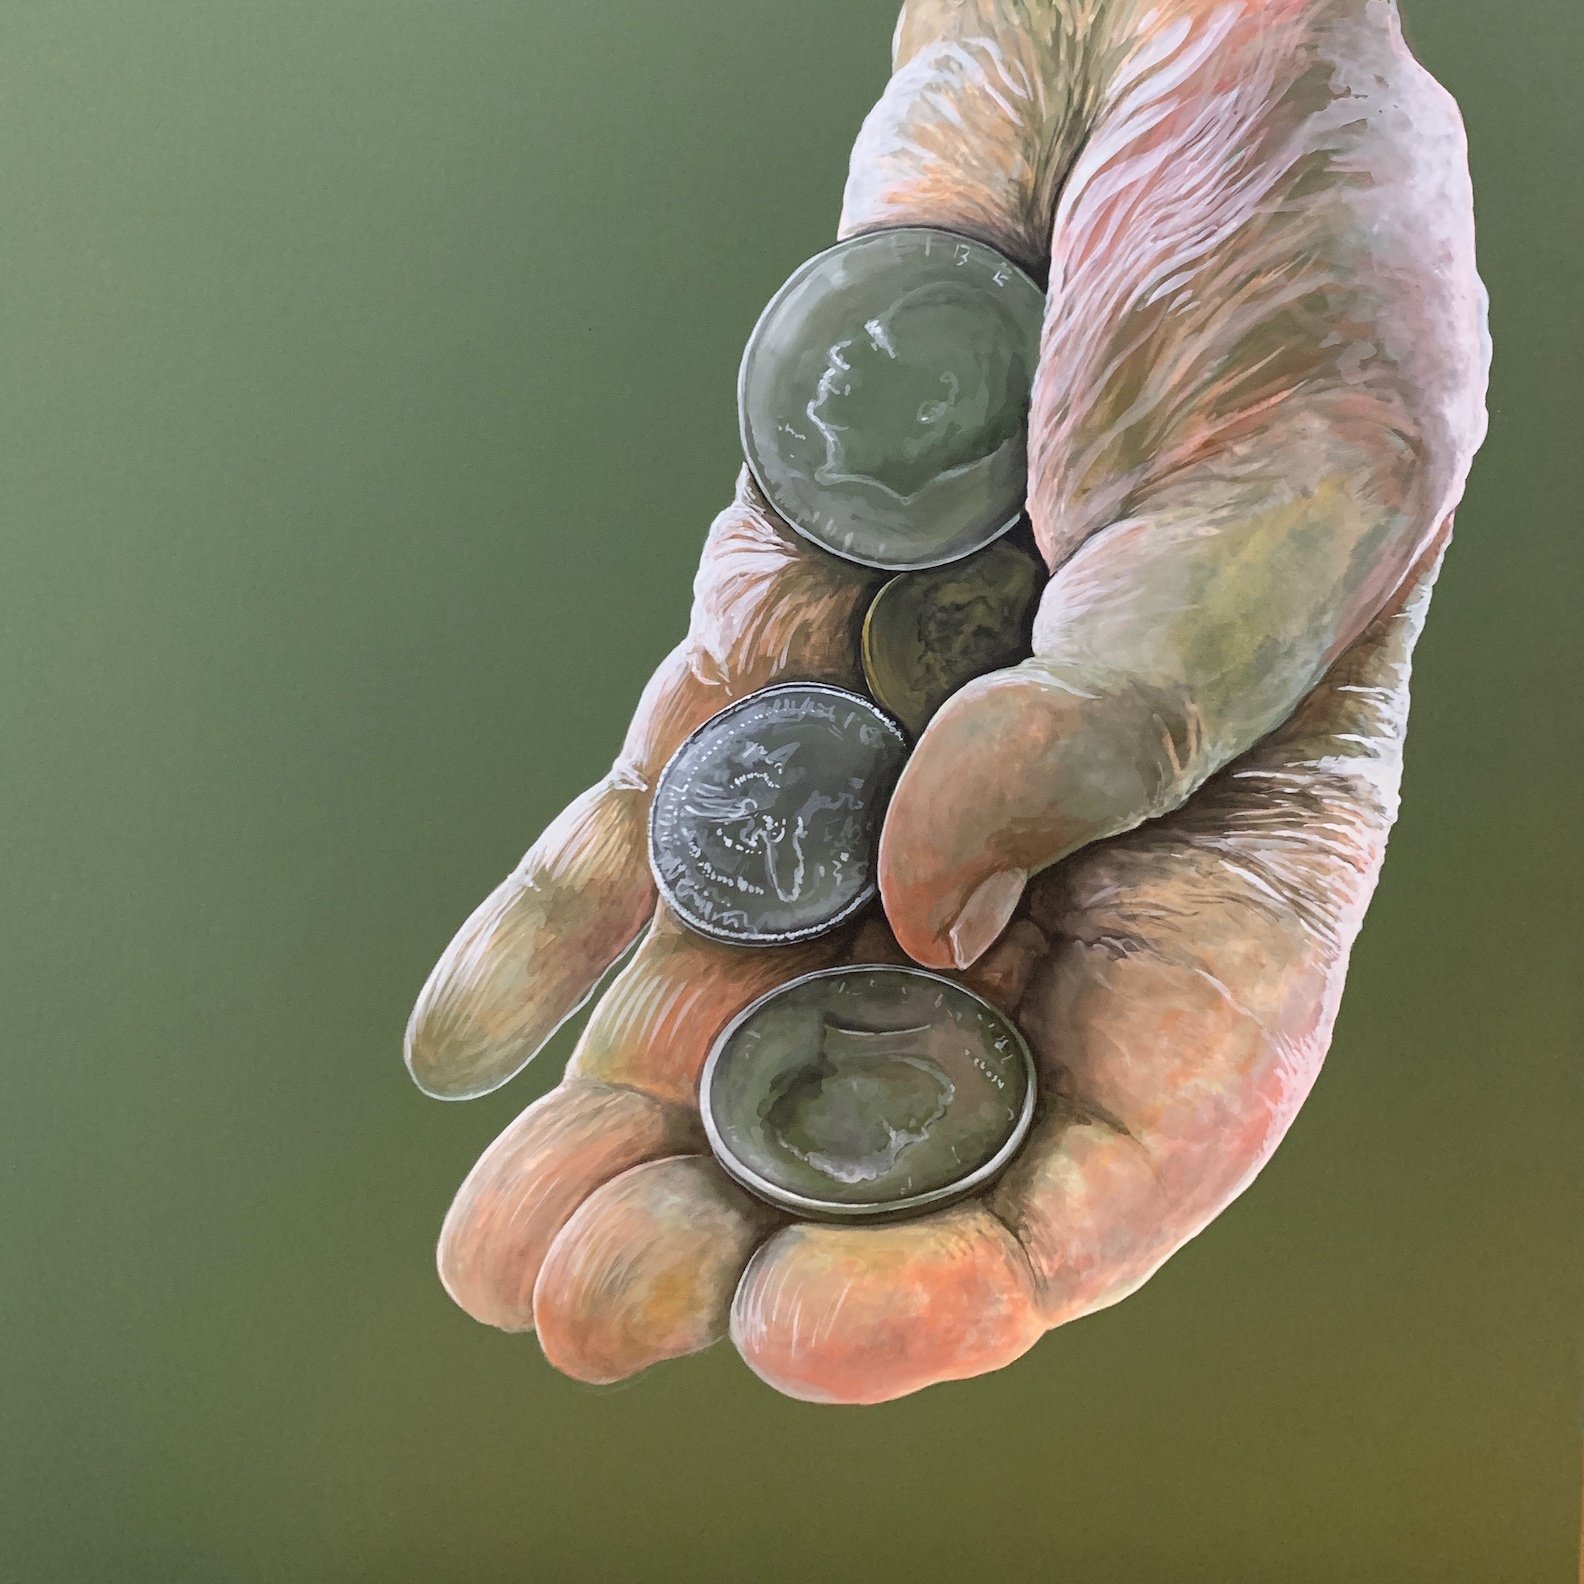    Coin  , 28” x 28”, watercolor on panel 